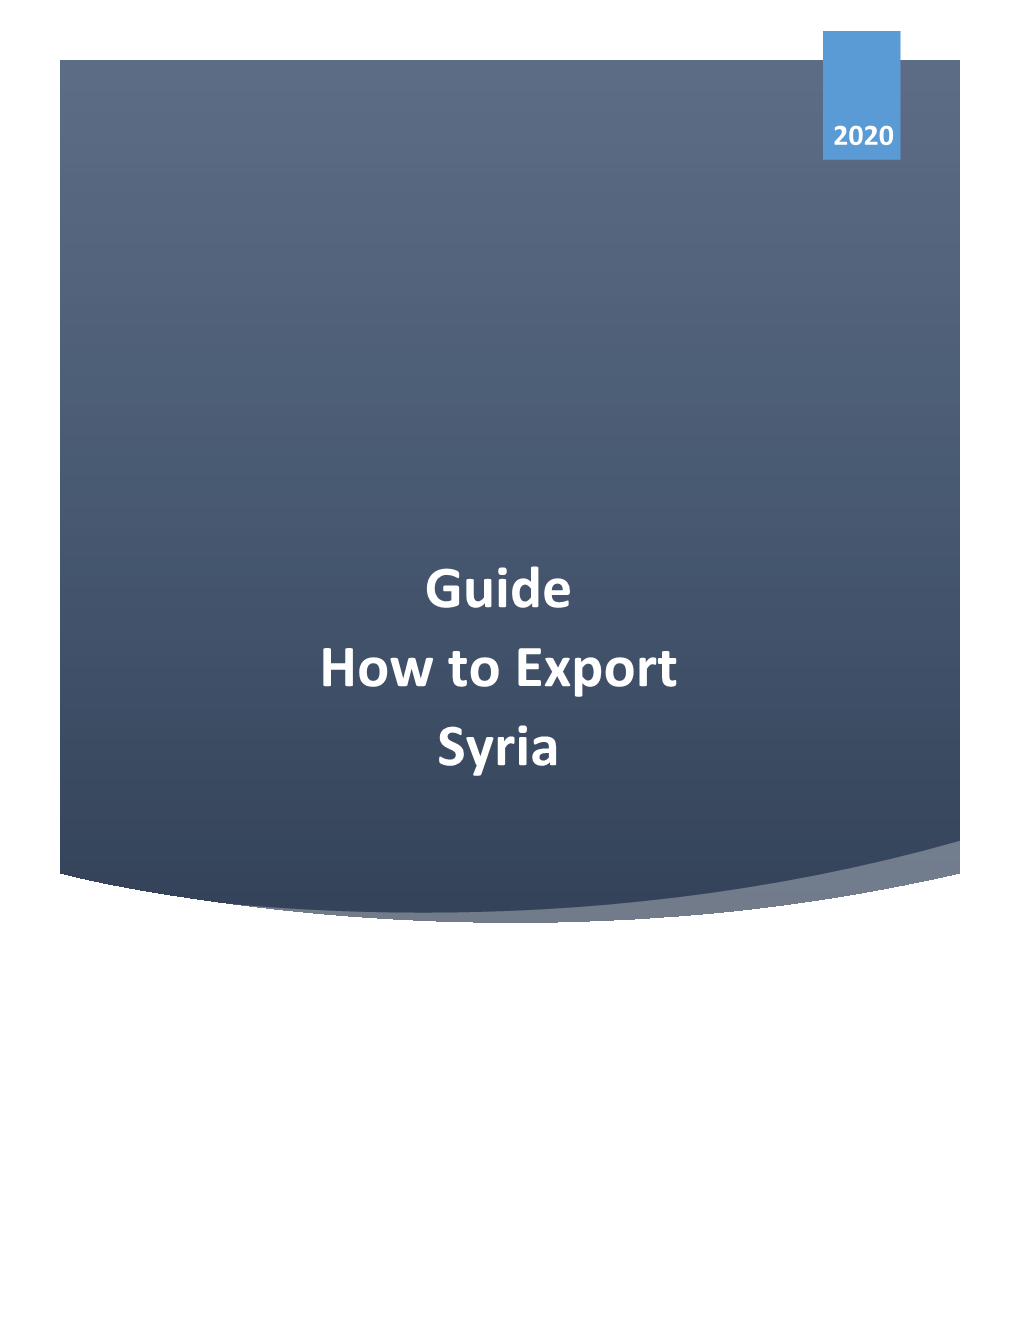 Guide How to Export Syria